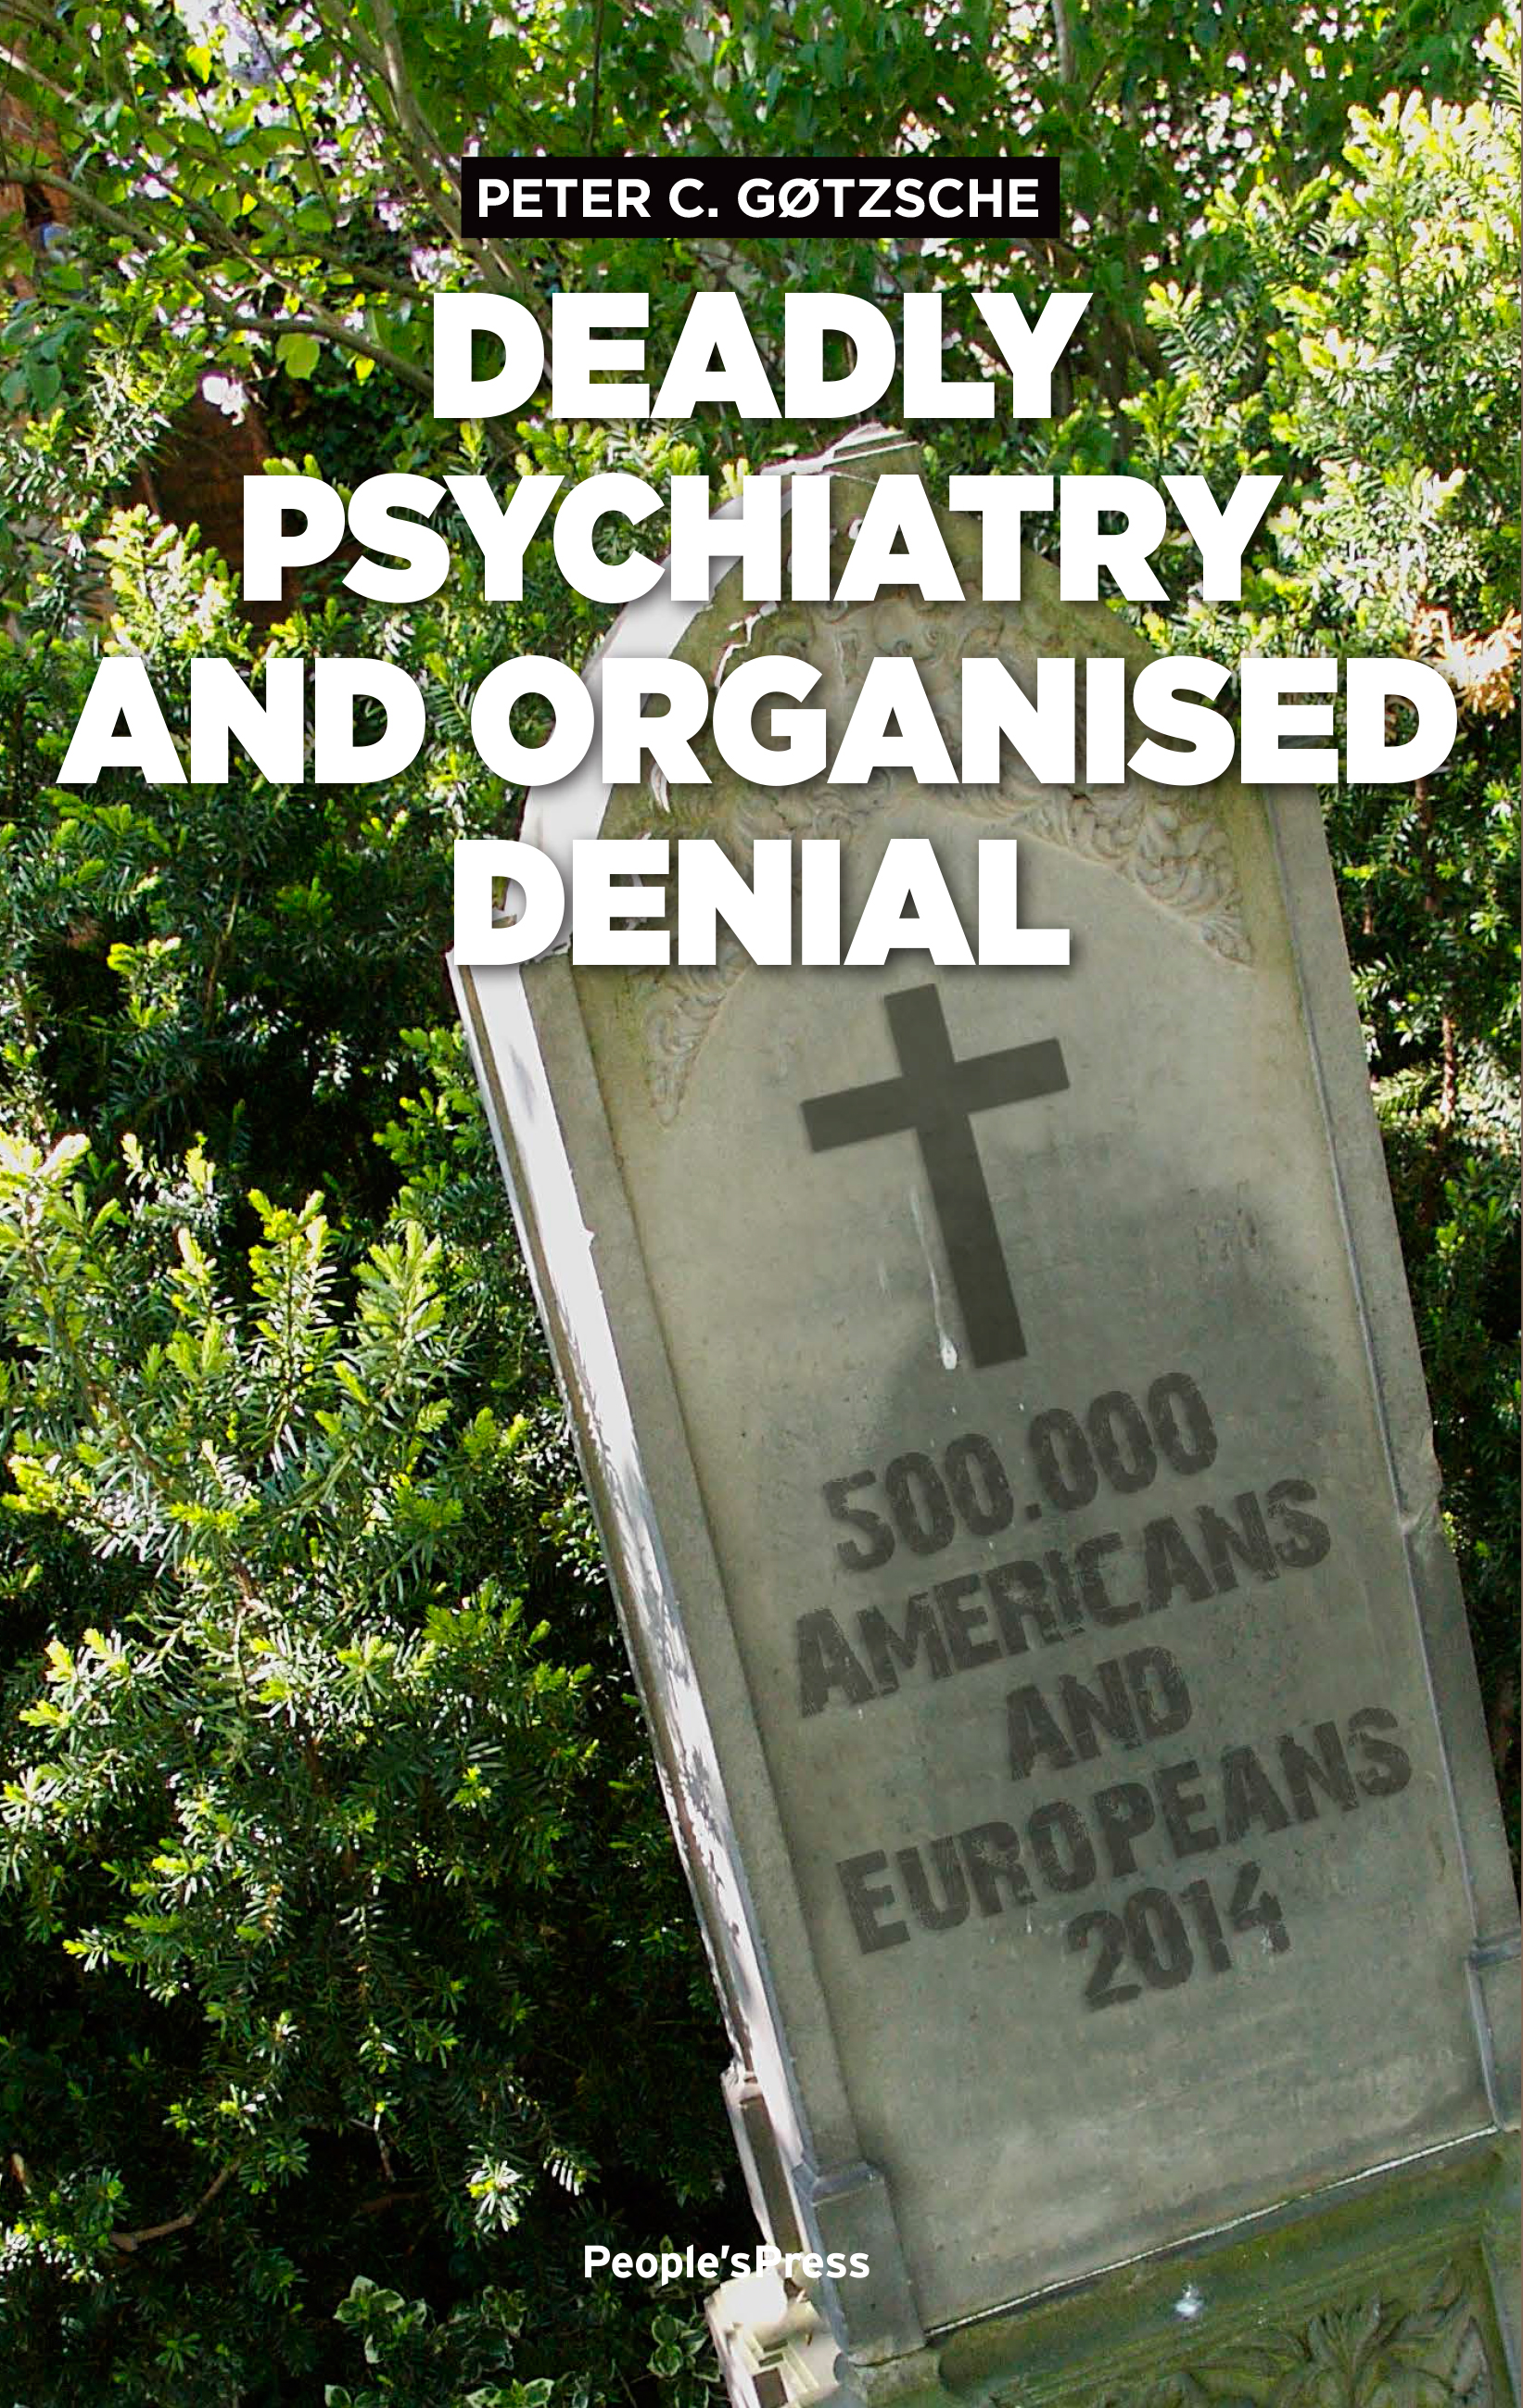 Cover for the book "Deadly Psychiatry and Organised Denial" by Peter C. Gøtzsche.